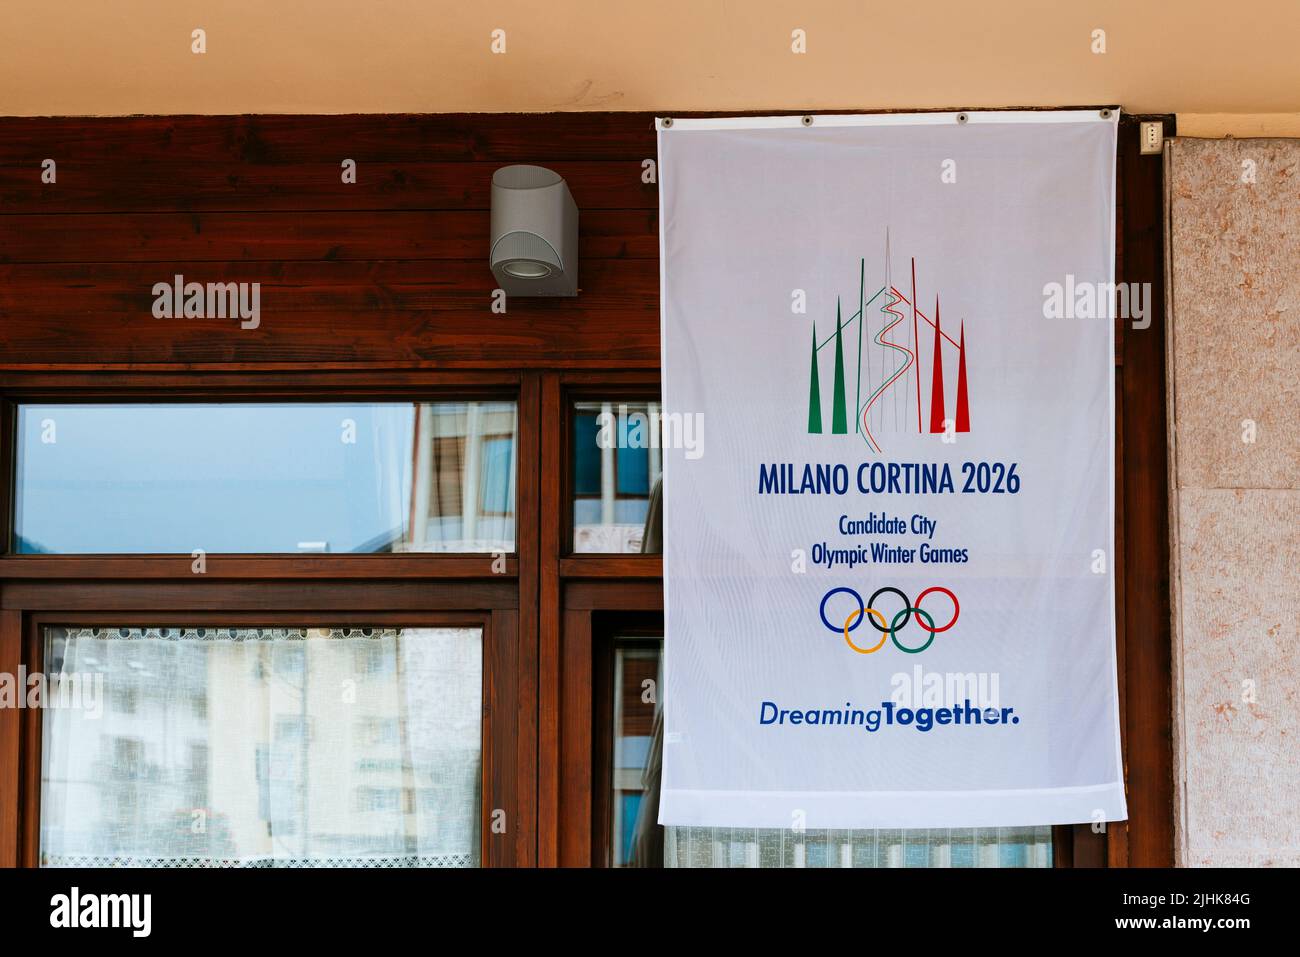 Flag of Milano - Cortina 2026, Candidate City Olimpics Winter Games. Dreaming Toguether. Cortina d'Ampezzo, Province of Belluno, Veneto, Italy, Europe Stock Photo